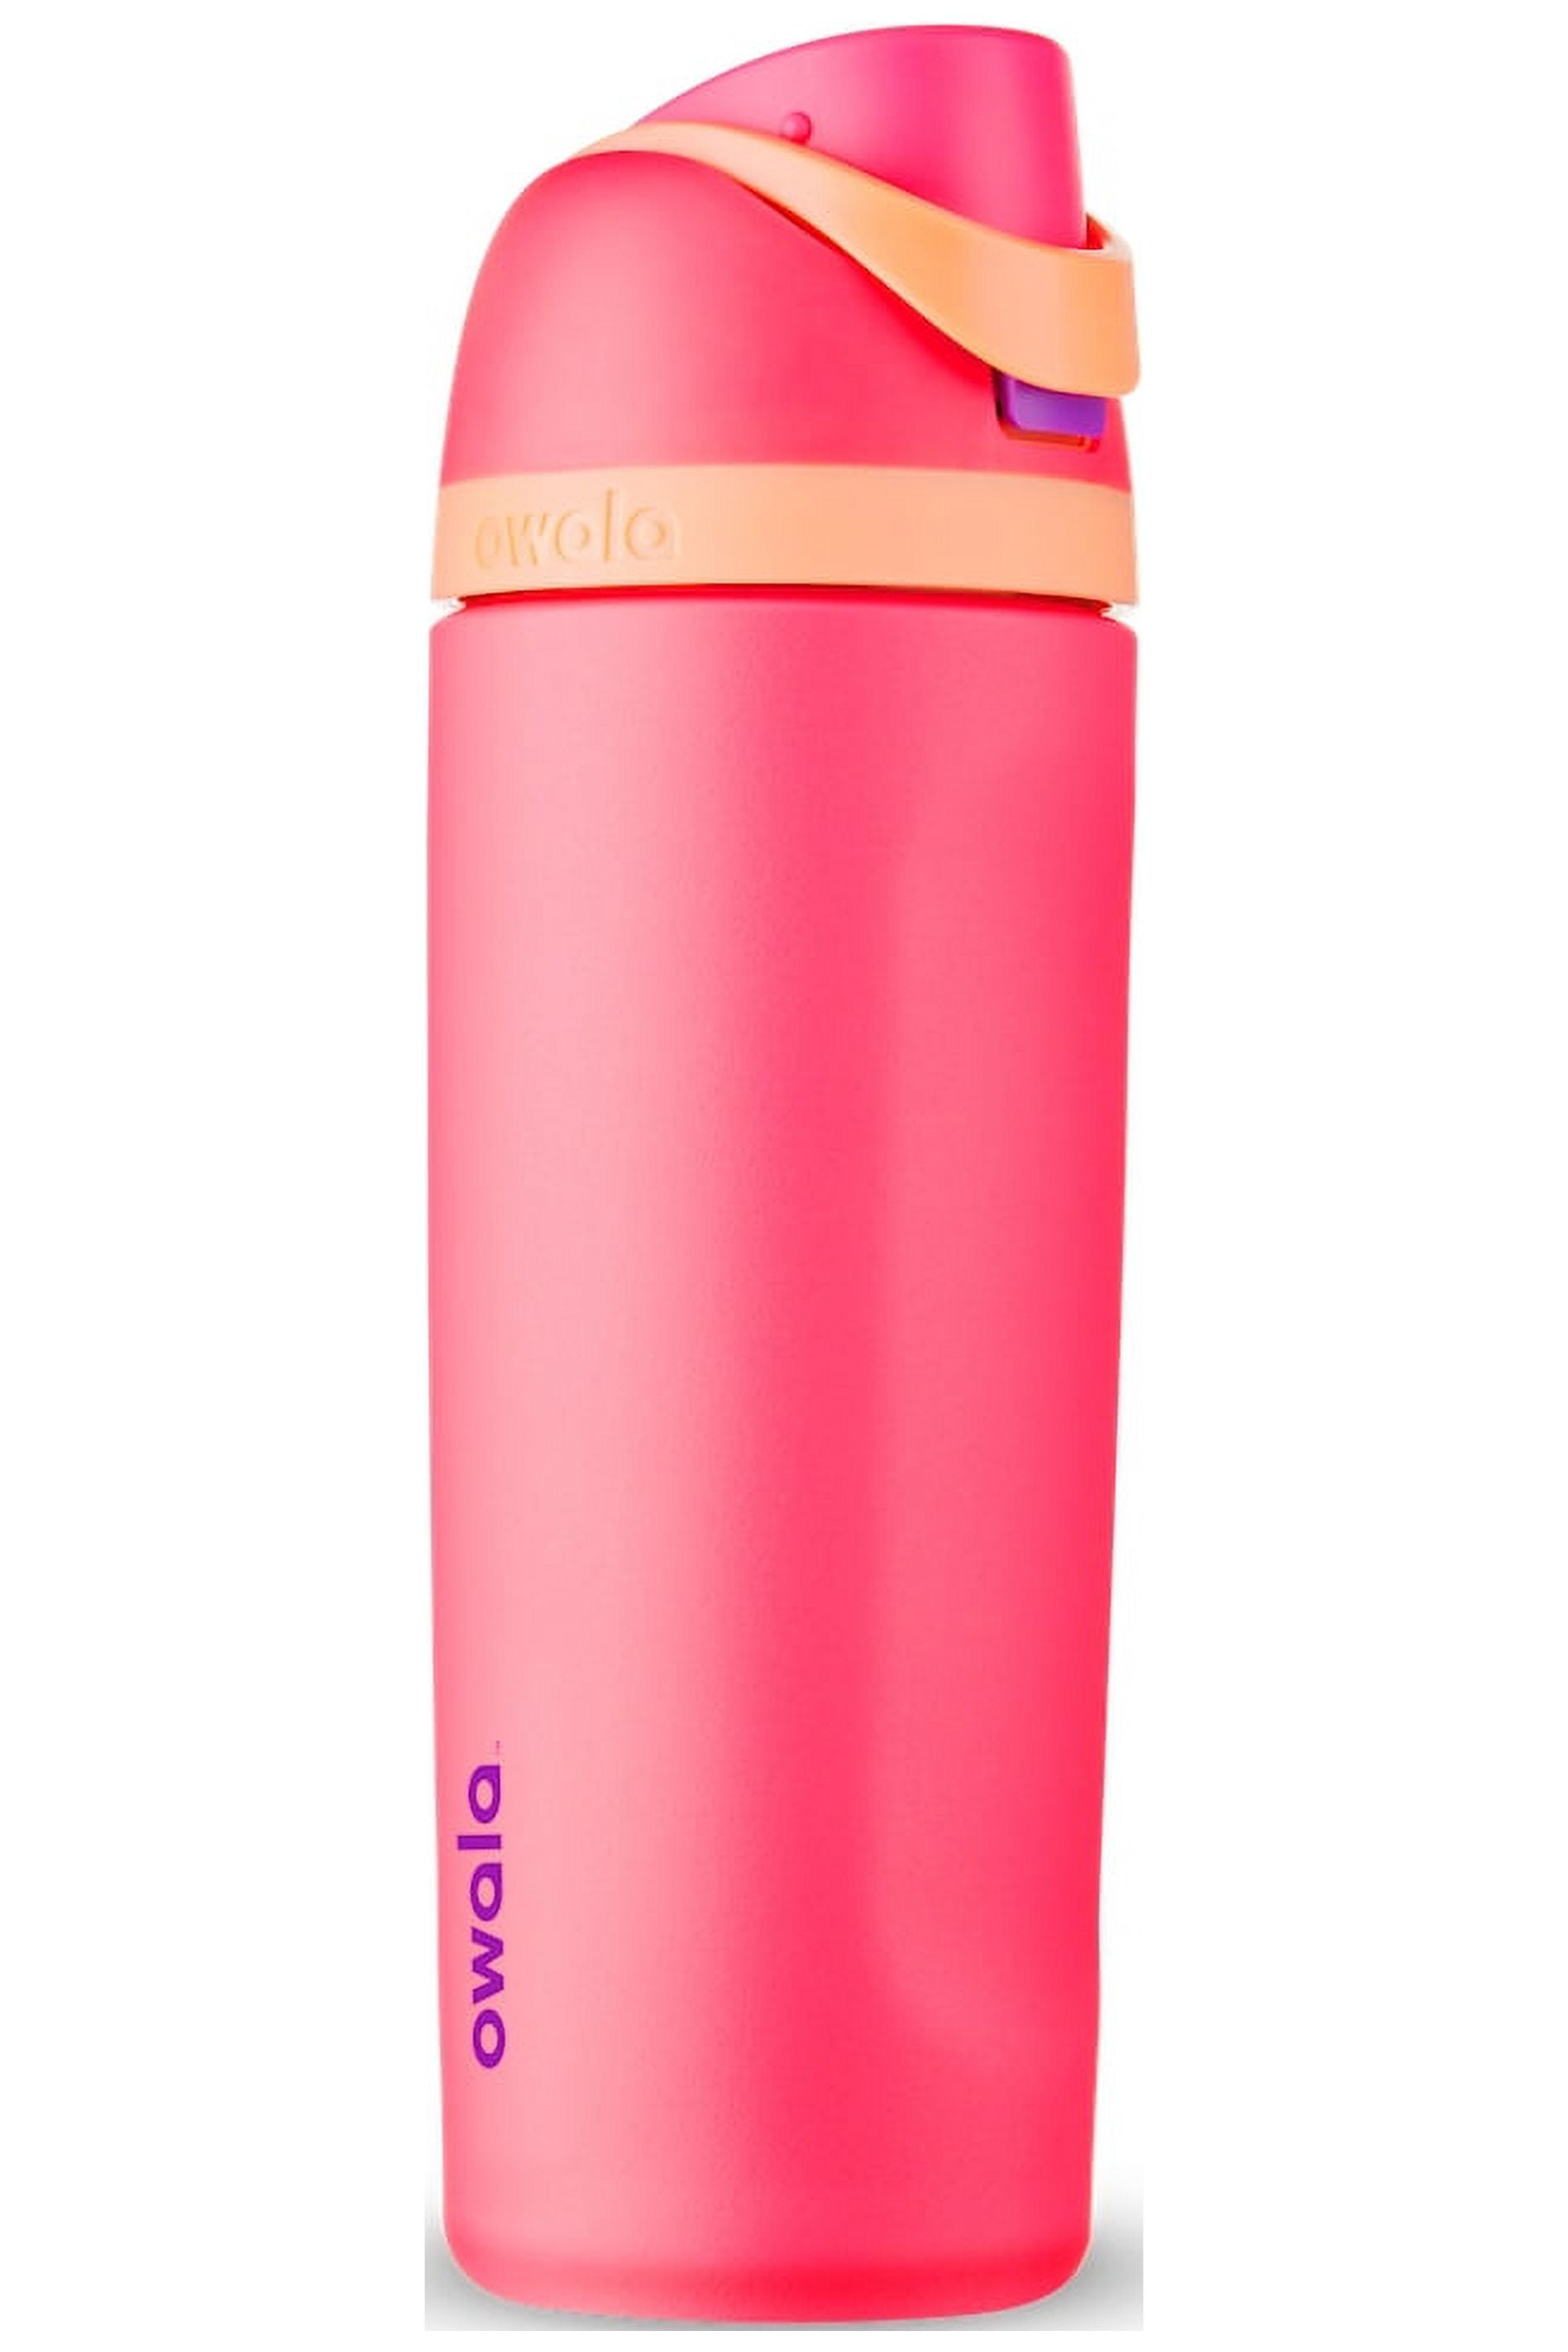 Owala FreeSip 19 oz Stainless Steel Water Bottle Pink Hyper Flamingo with  Carry Loop and FreeSip Spout 